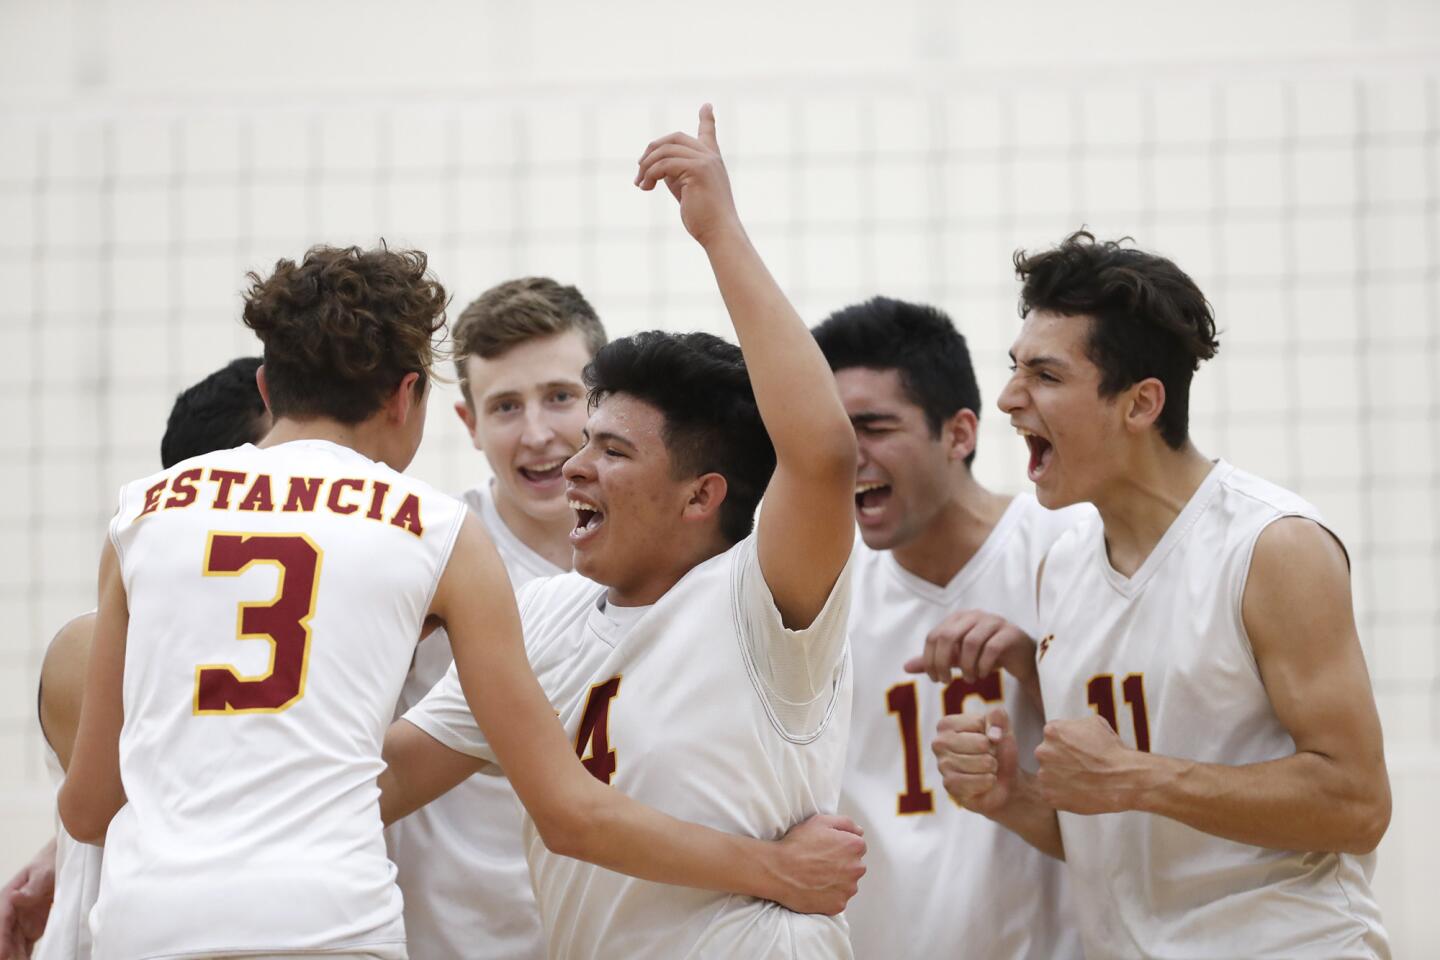 Estancia boys' volleyball team cheers after winning a point in game four against Costa Mesa on Tuesday, April 10.